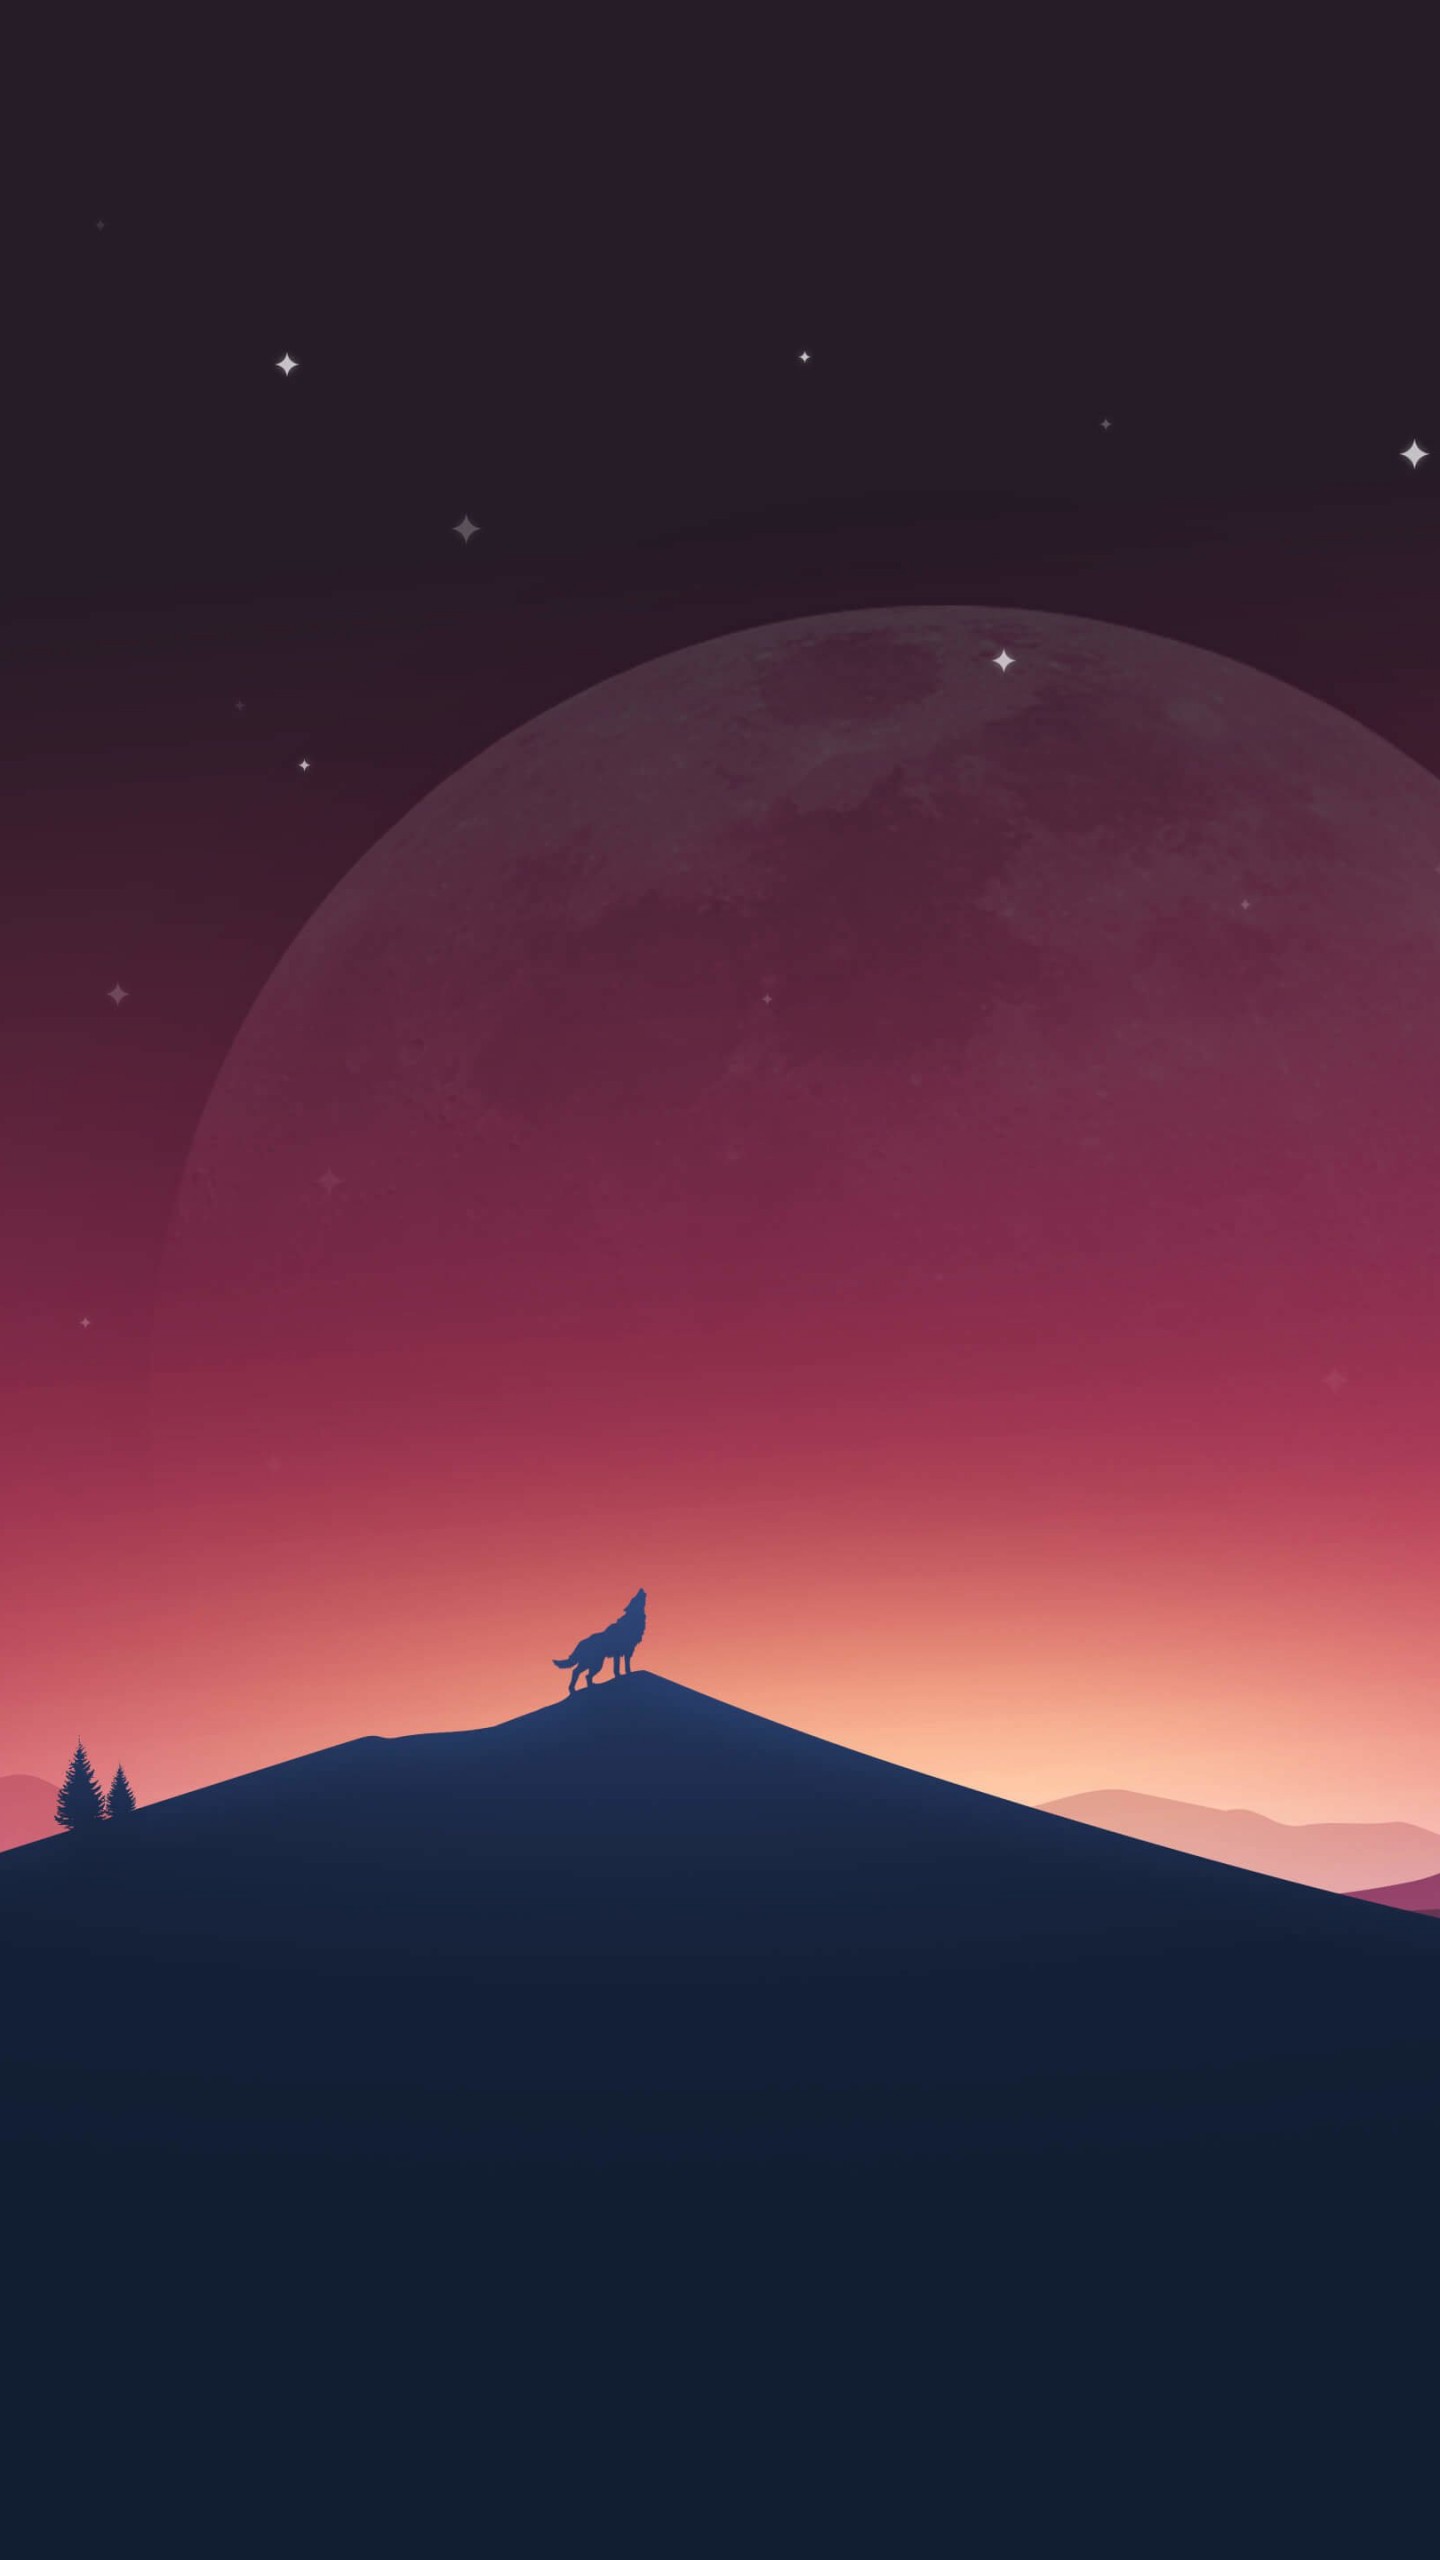 Wolf Howling At The Moon Wallpaper for Google Nexus 6